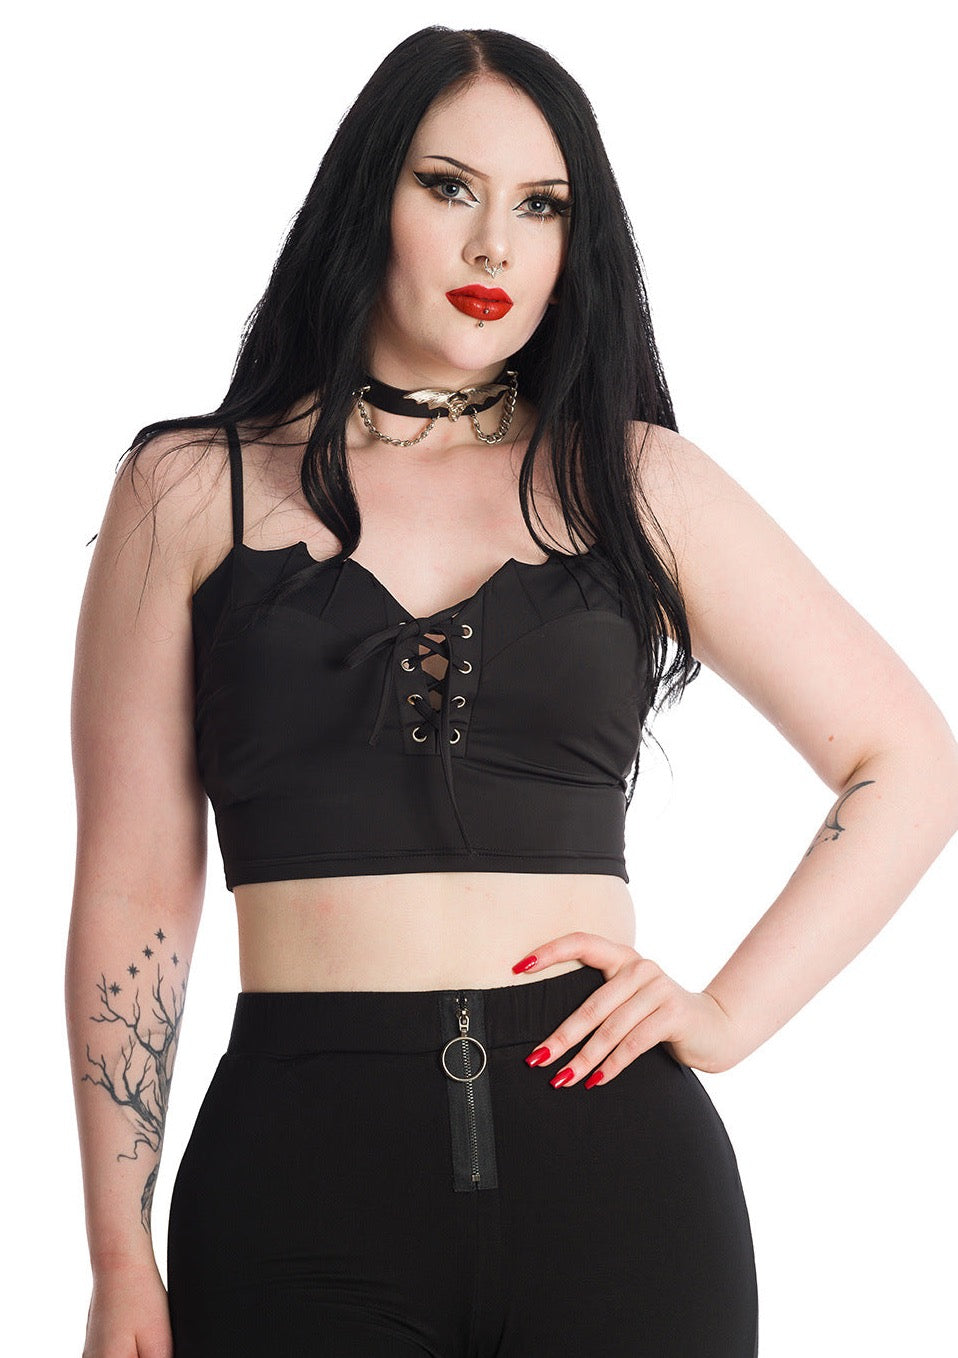 A model wearing a black bustier style crop top with a sweetheart neckline with batwing-style scalloped detail at the top of the bodice, 4 rows of lace-up eyelets with silver metal hardware, and adjustable spaghetti straps. Shown from the front